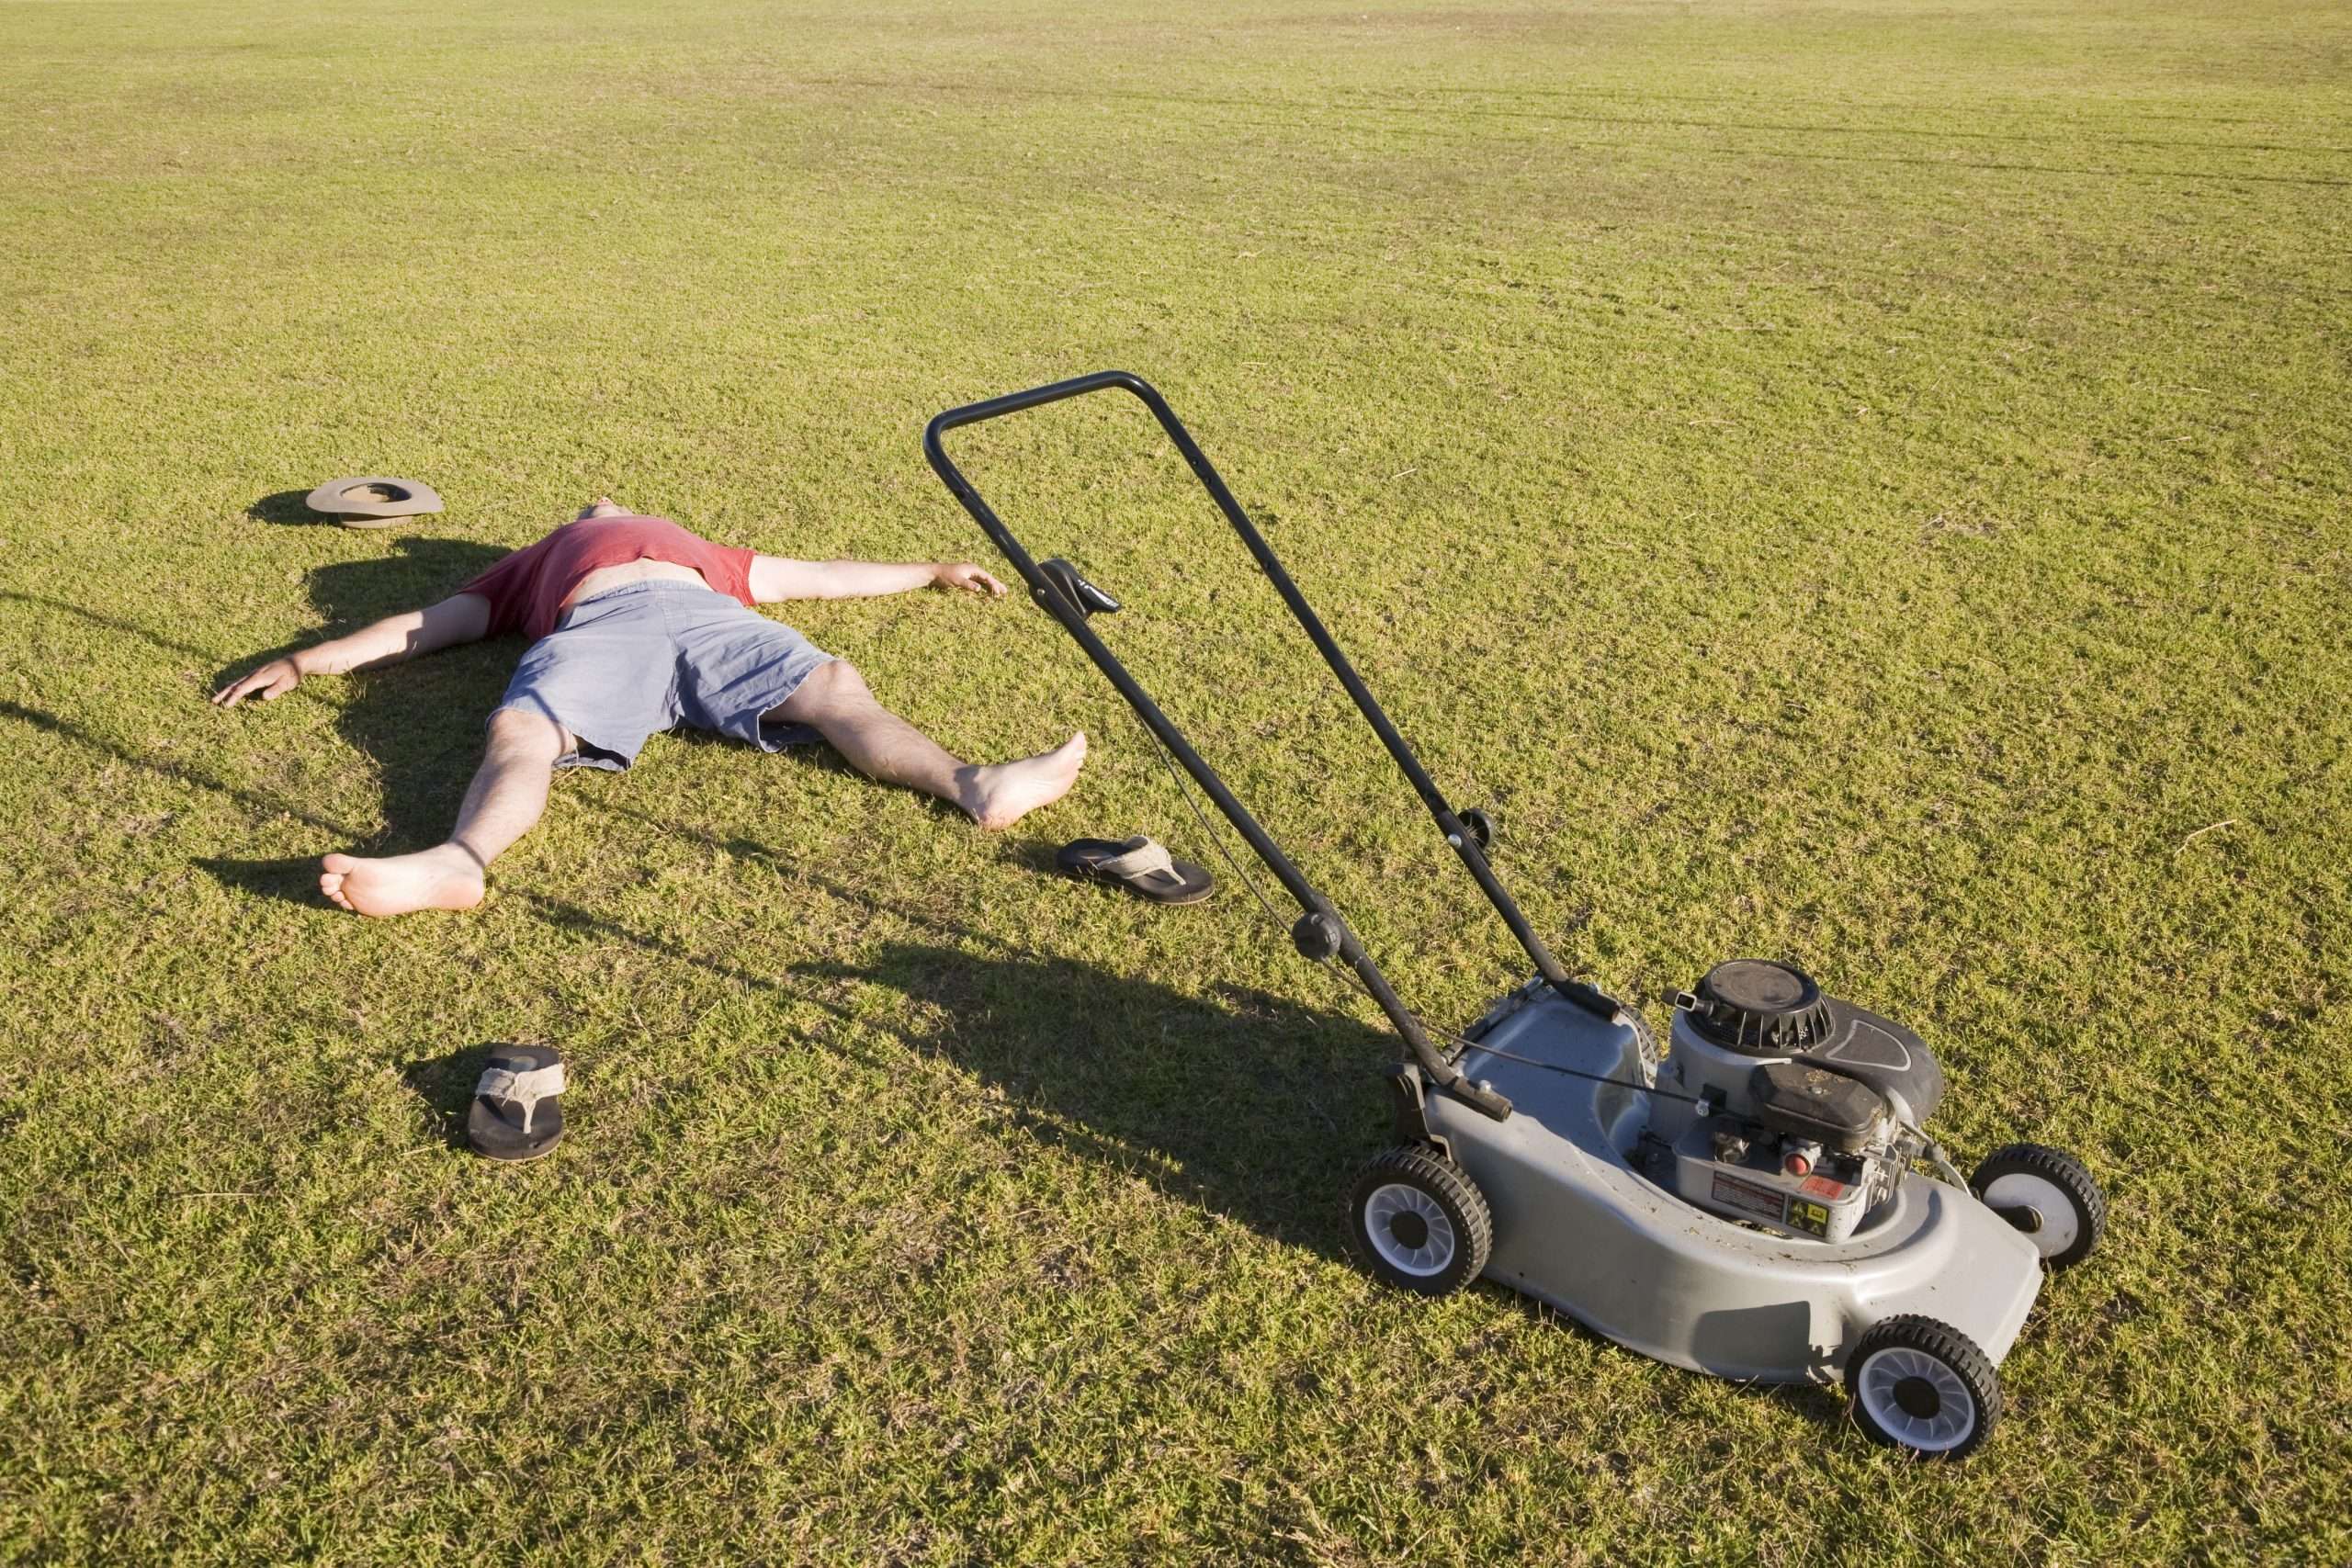 Mowing the Lawn is Bad for your Health